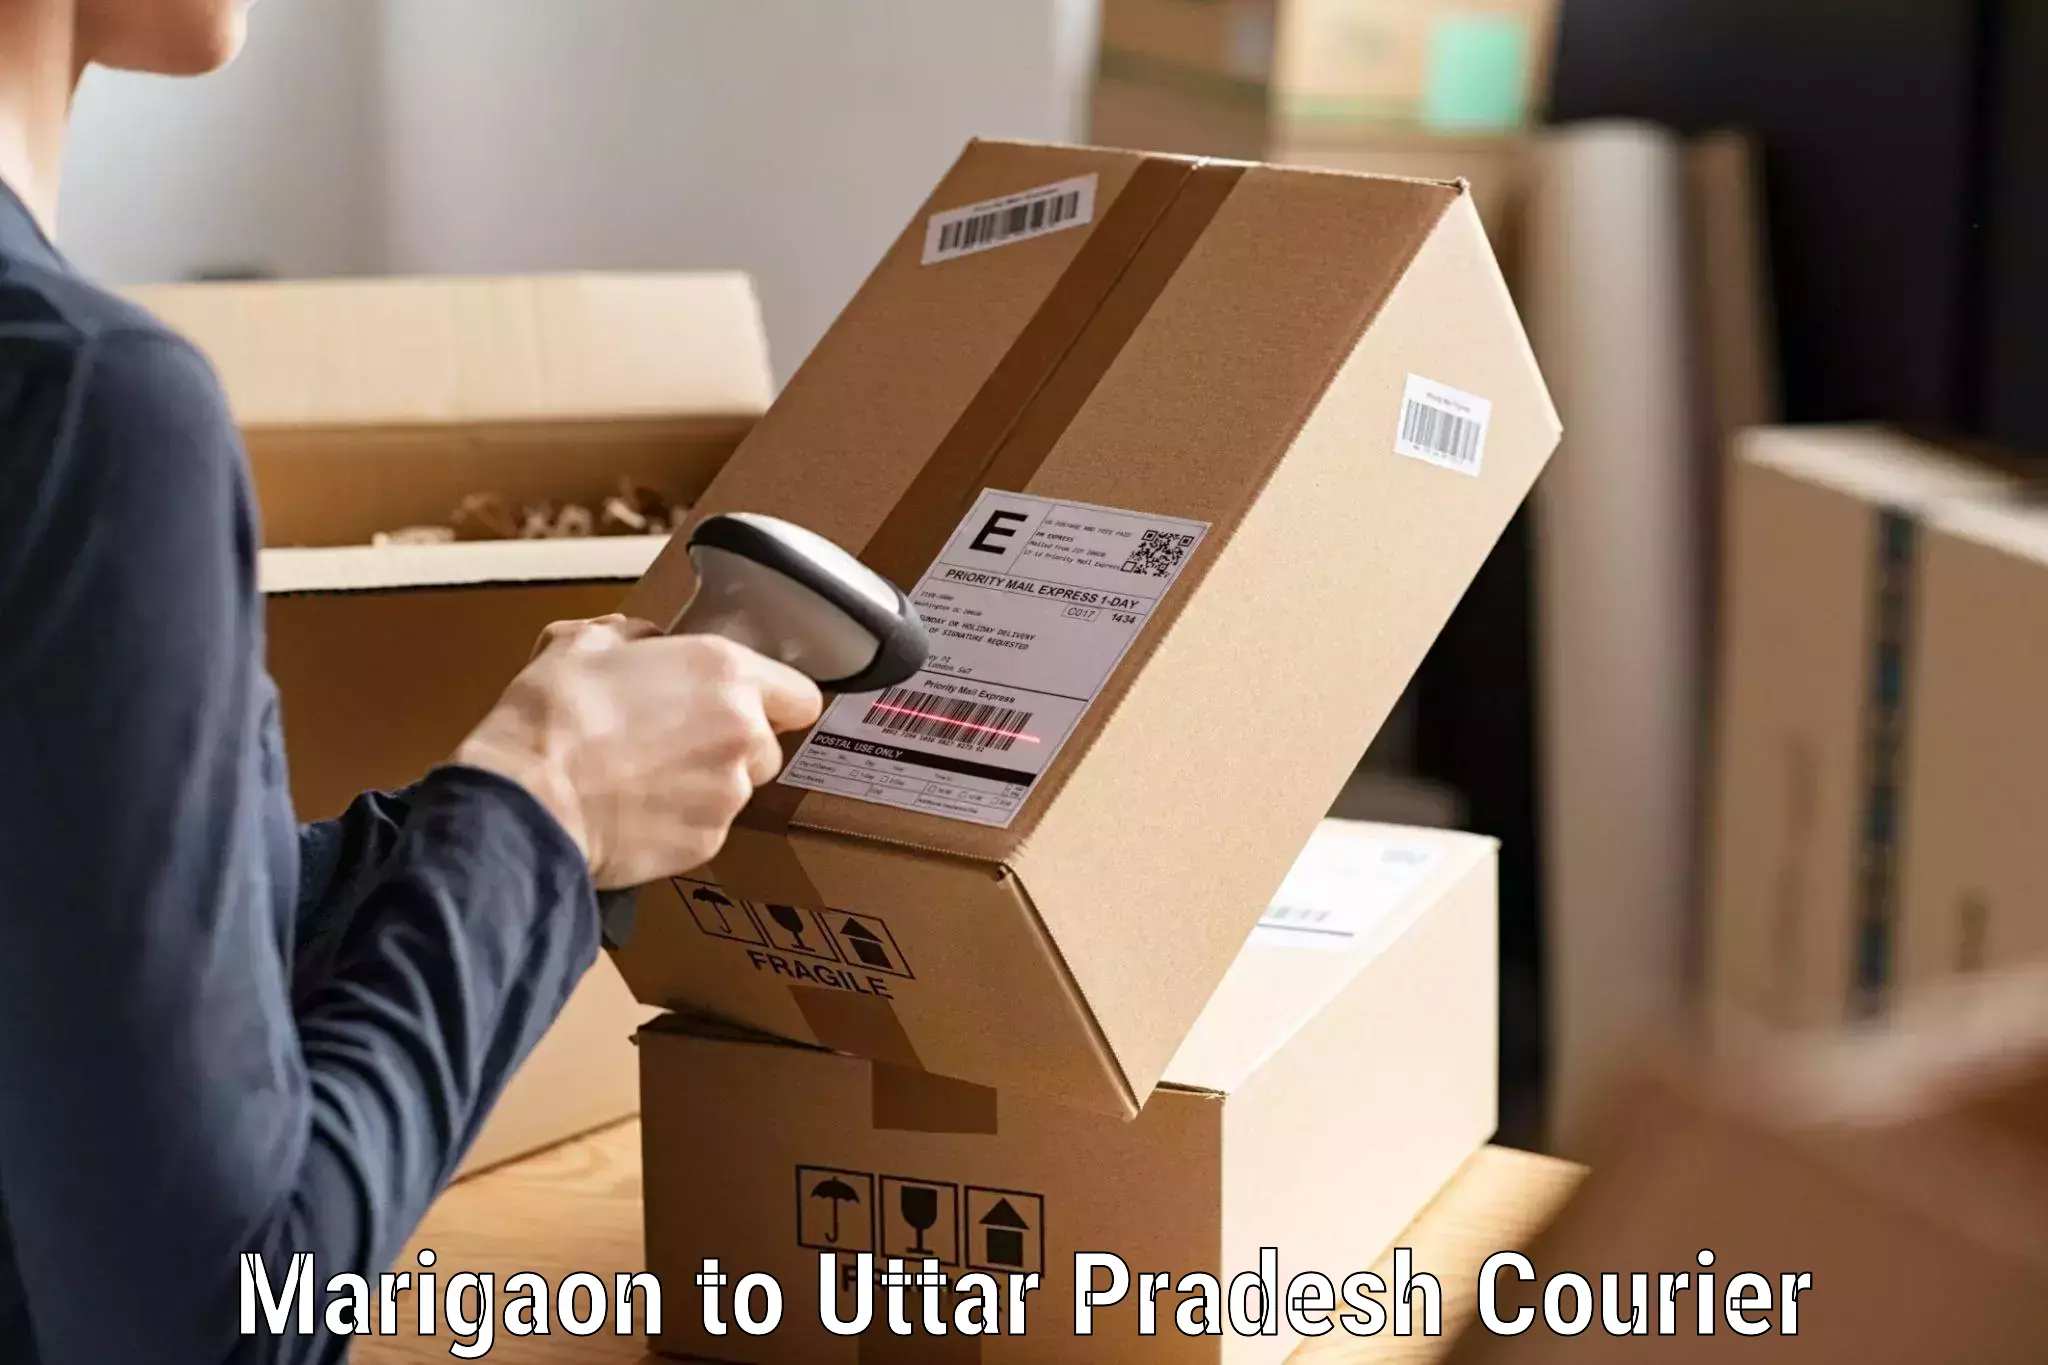 Reliable courier service Marigaon to Aligarh Muslim University